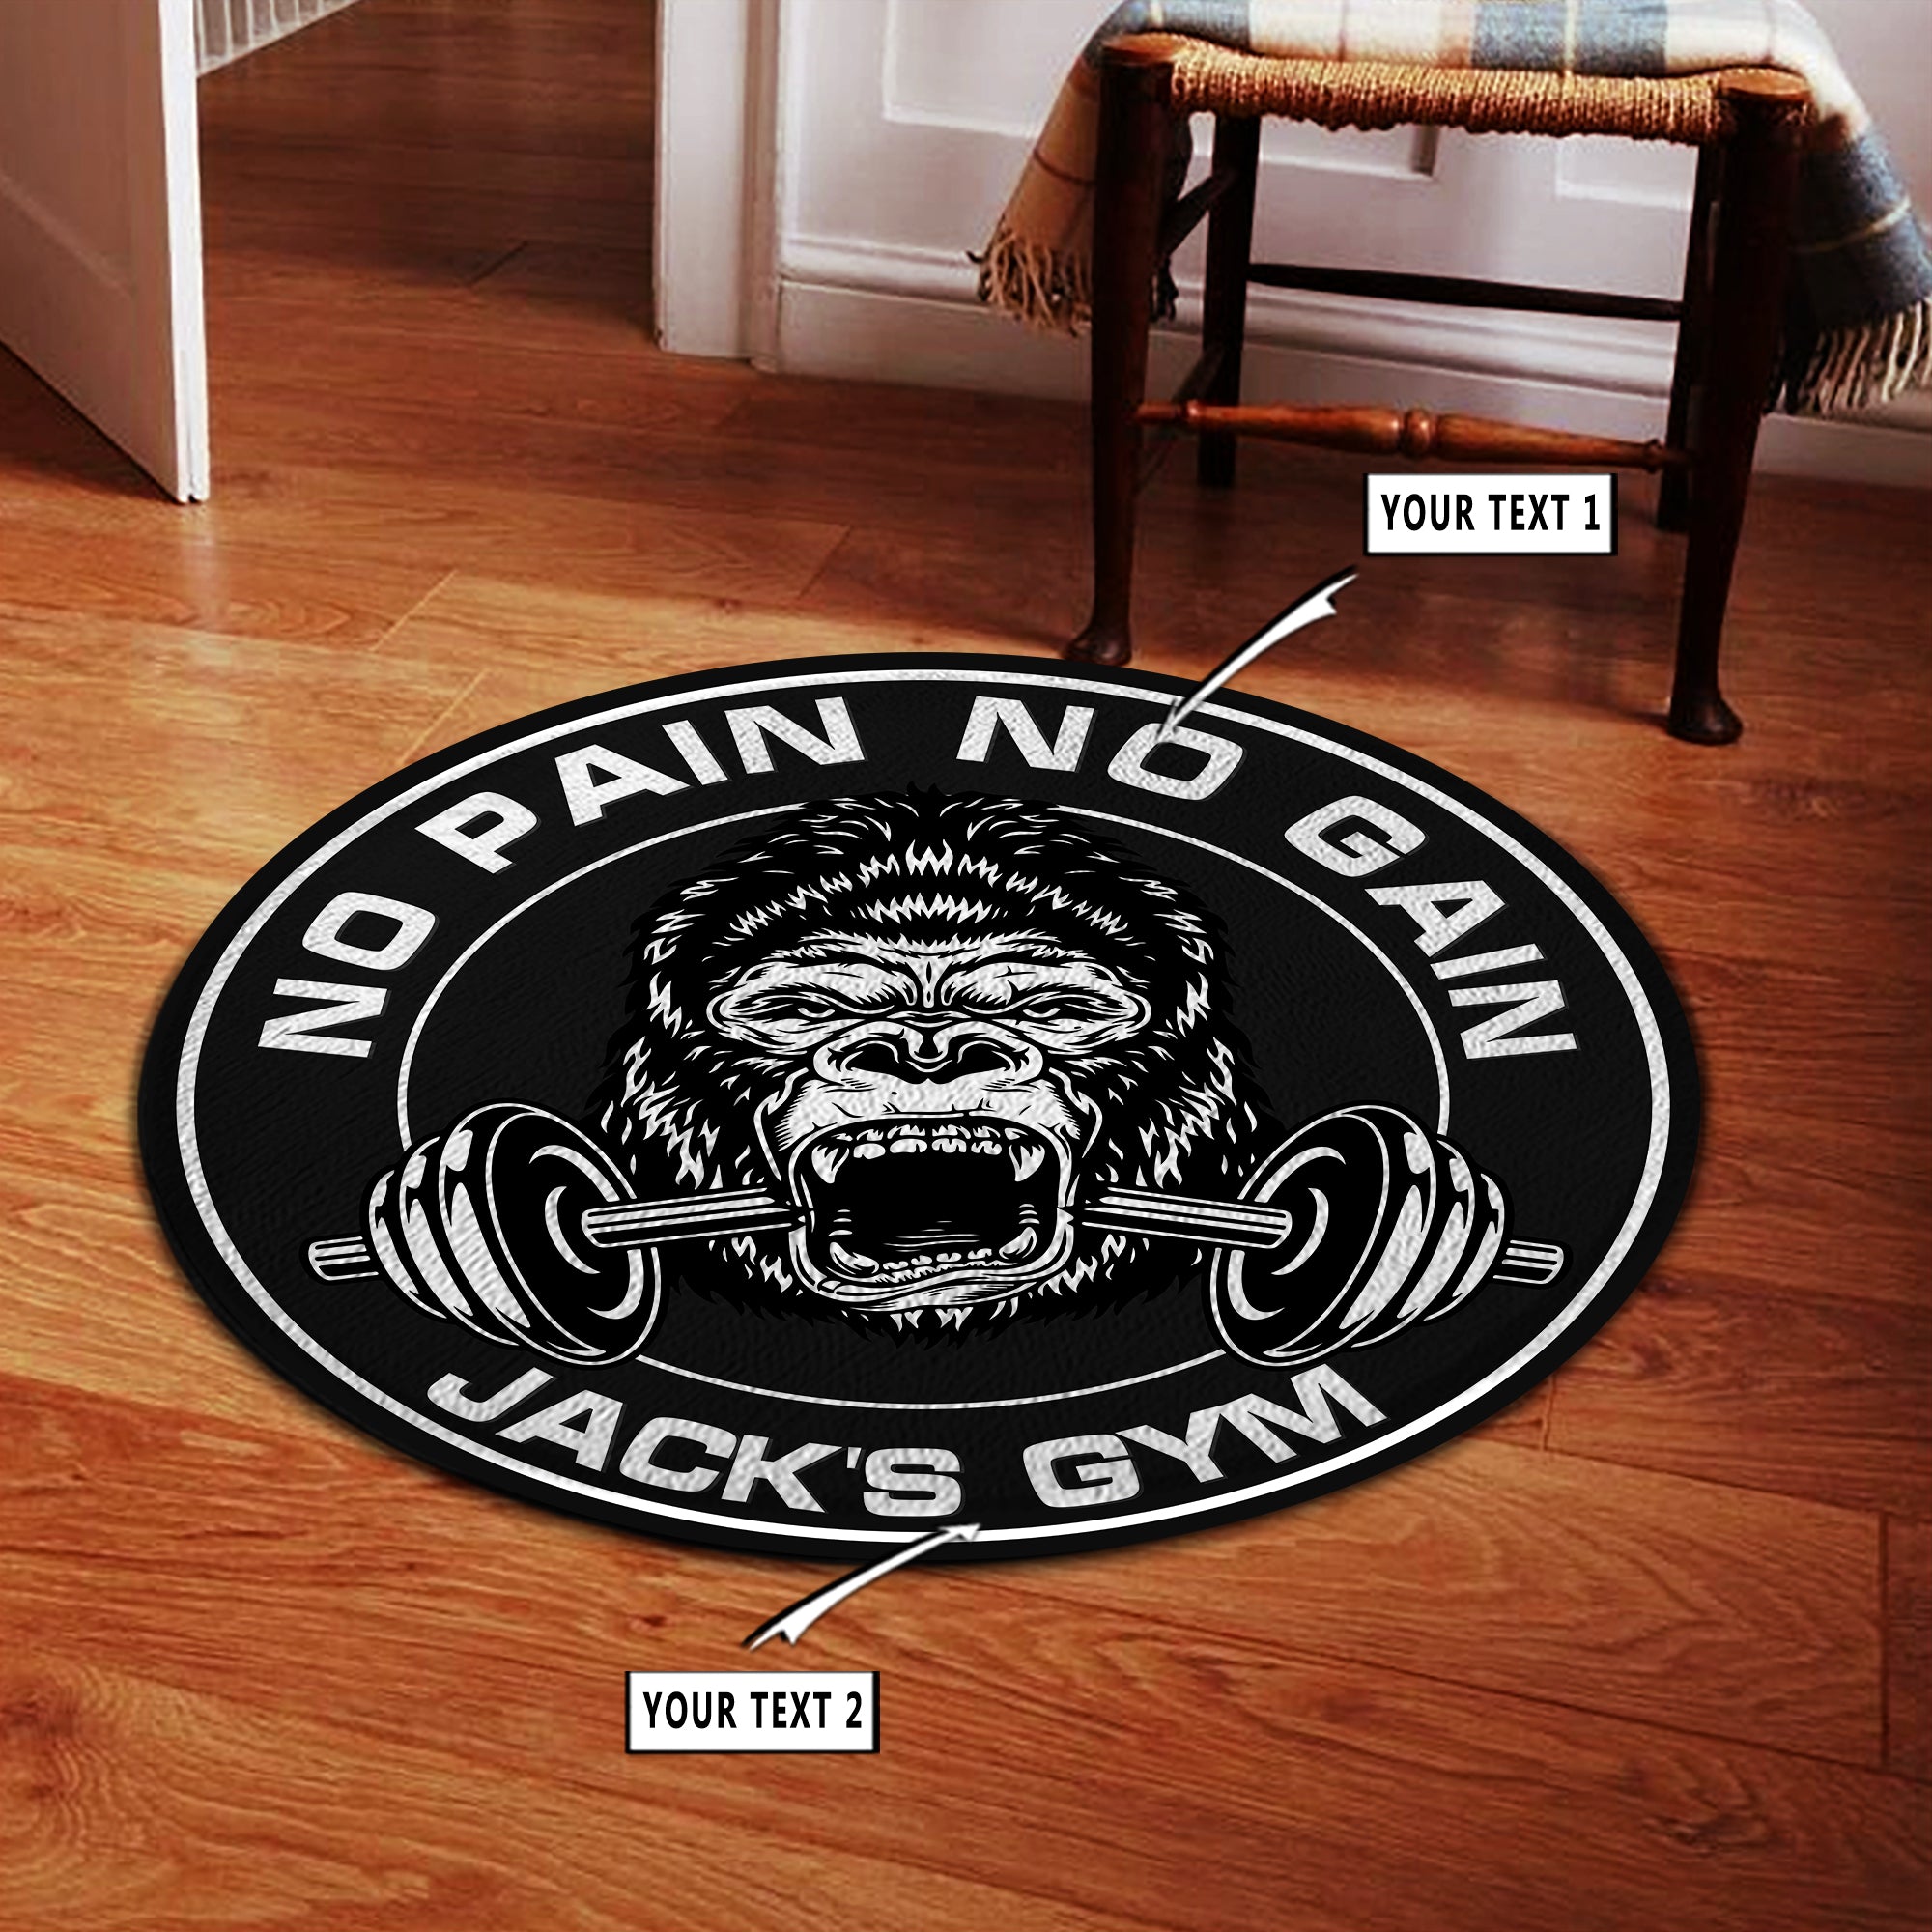 Eye-Catching Round Rug - Perfect Addition to Your Home Gym